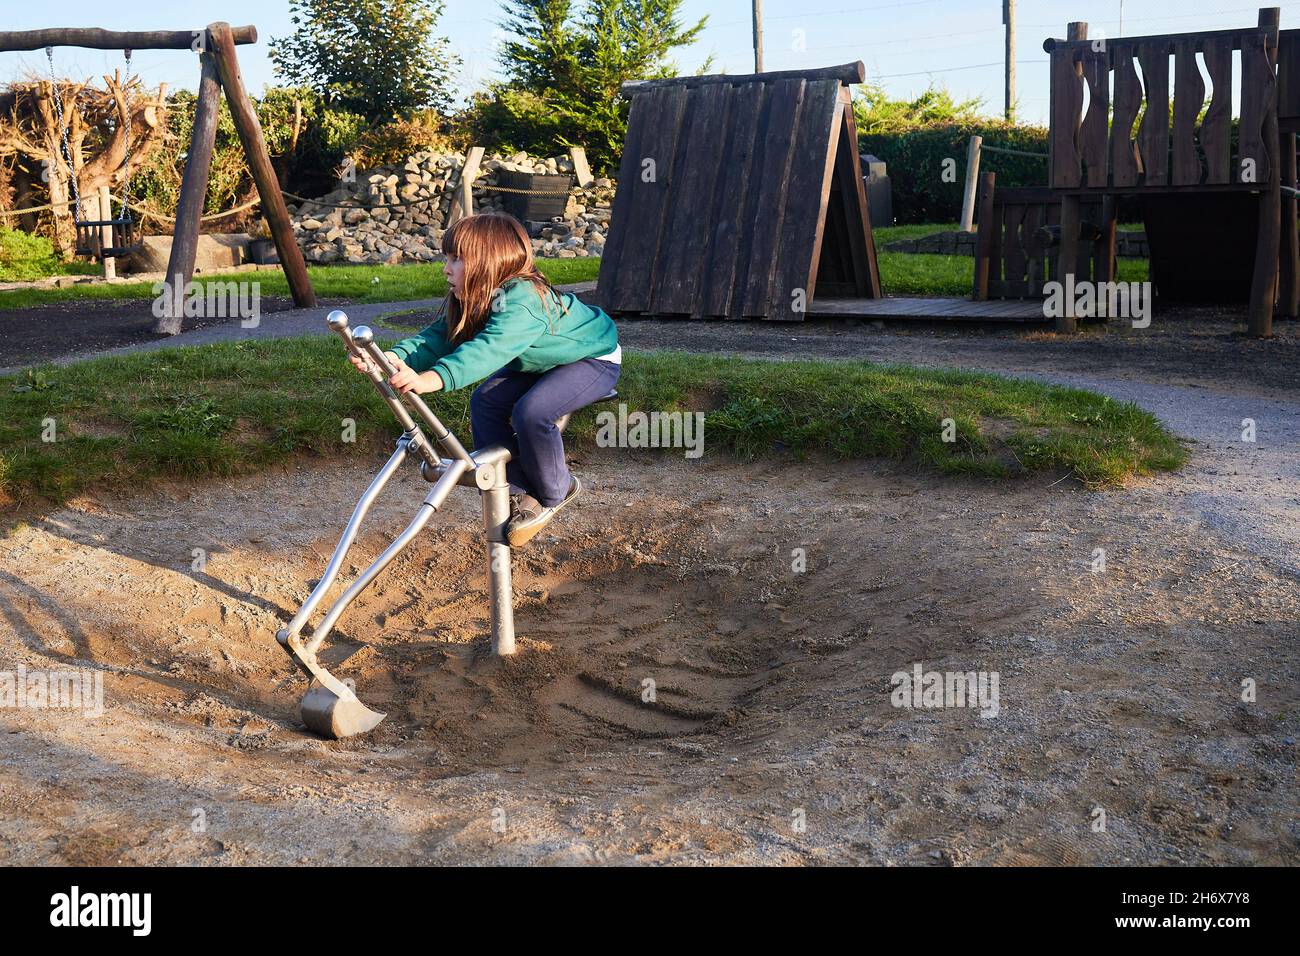 young girl in school uniform playing with a bulldozer in a playground Stock Photo